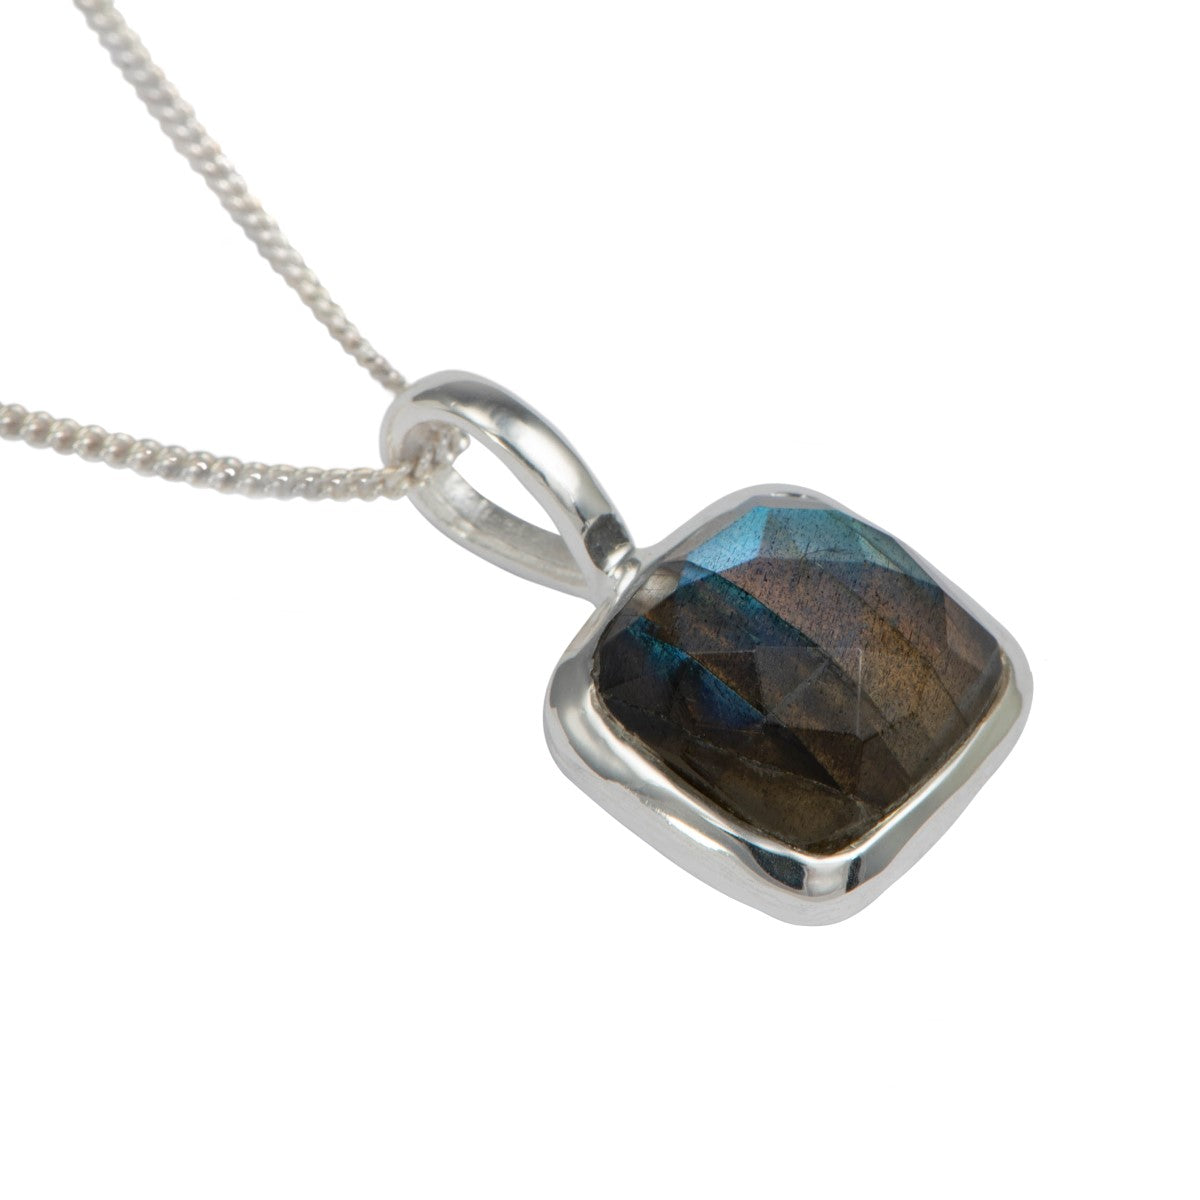 Sterling Silver Pendant Necklace with a Faceted Square Gemstone - Labradorite